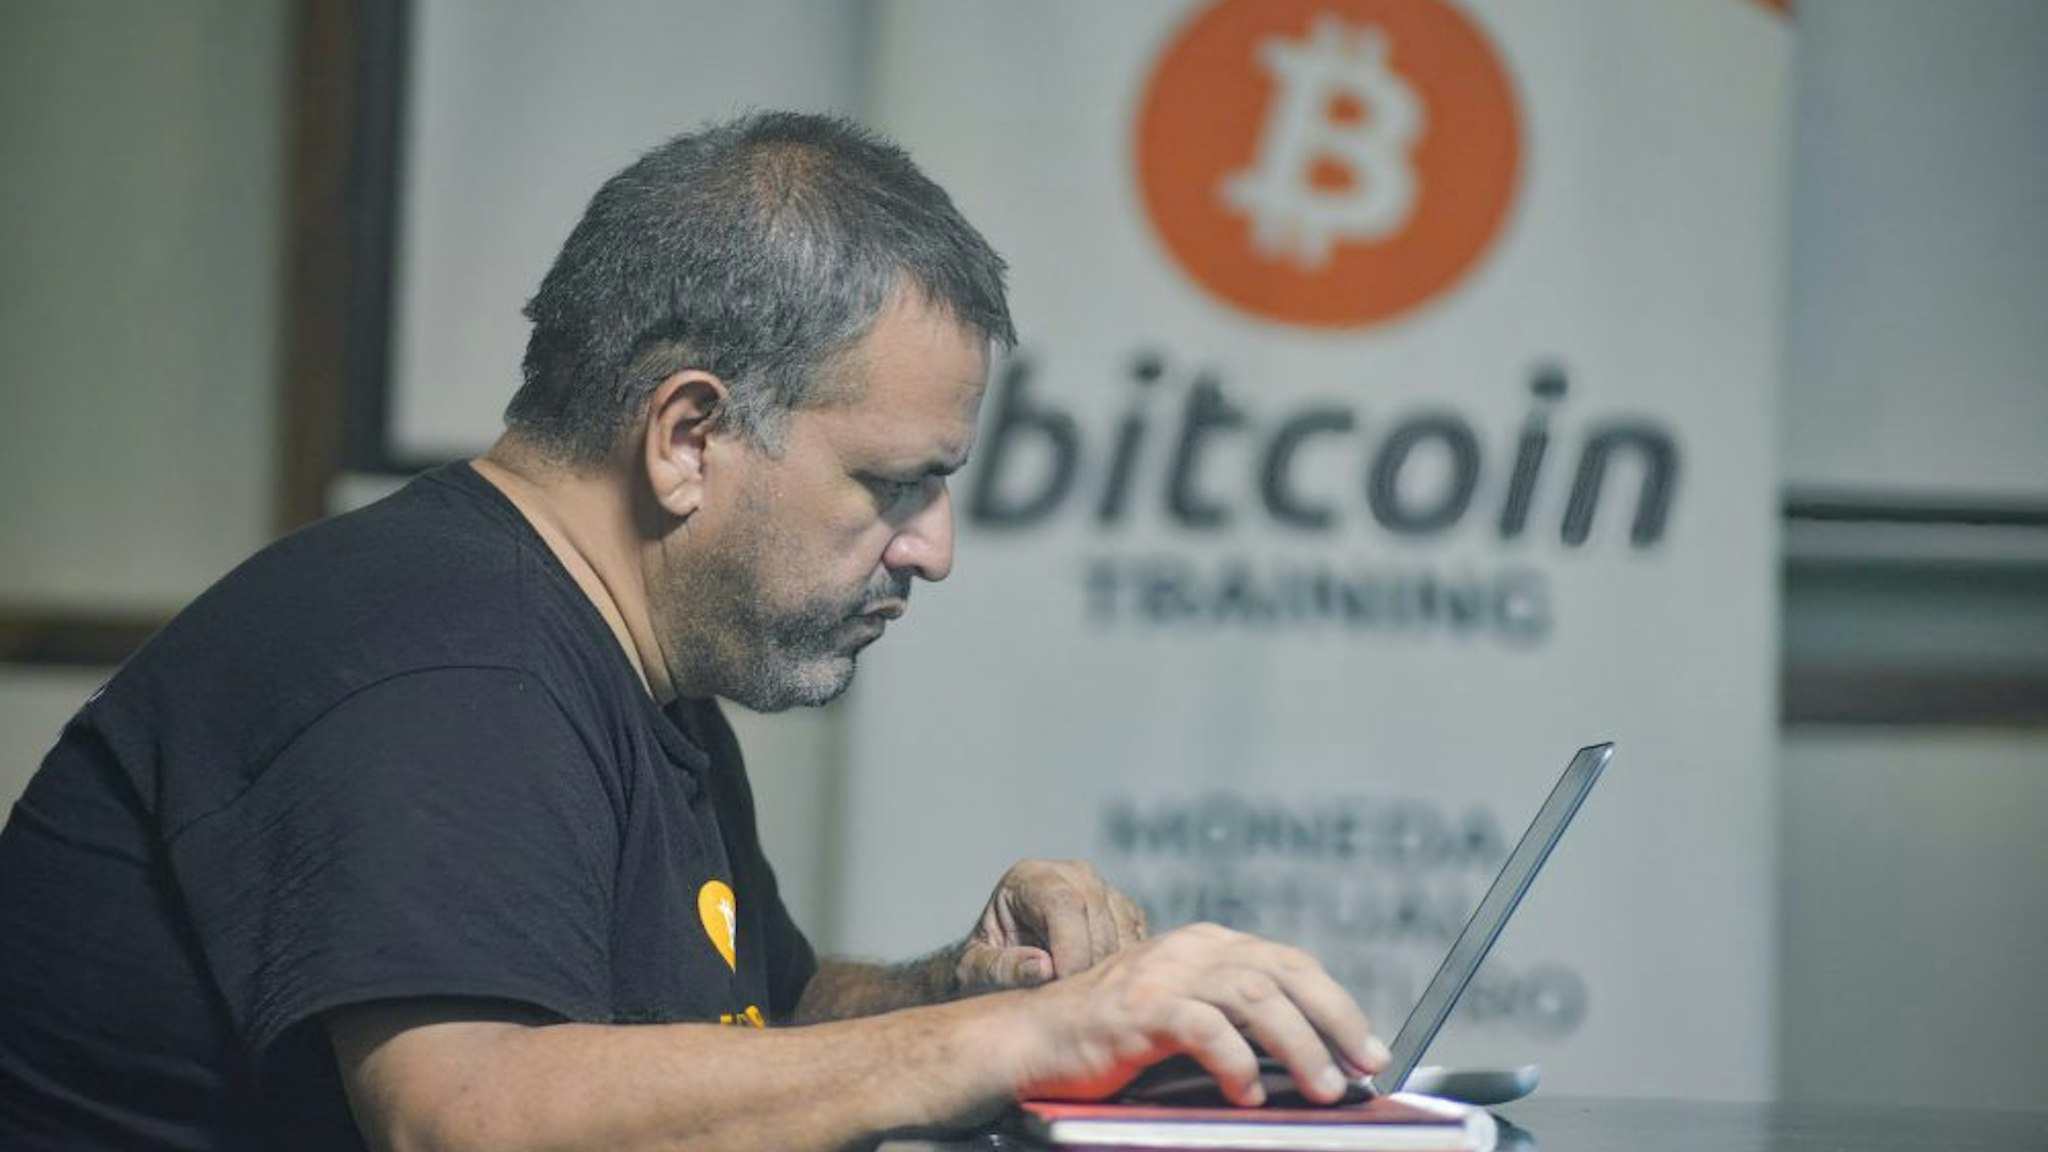 CHILTUIPAN, LA LIBERTAD, EL SALVADOR - 2021/06/07: A man works on a laptop at a Bitcoin training facility. Salvadoran President Nayib Bukele has announced that he will propose a law to the Congress, where his party controls a majority, for Bitcoin to become legal tender. El Salvador would become the first country in the world to accept a cryptocurrency as a legal tender.